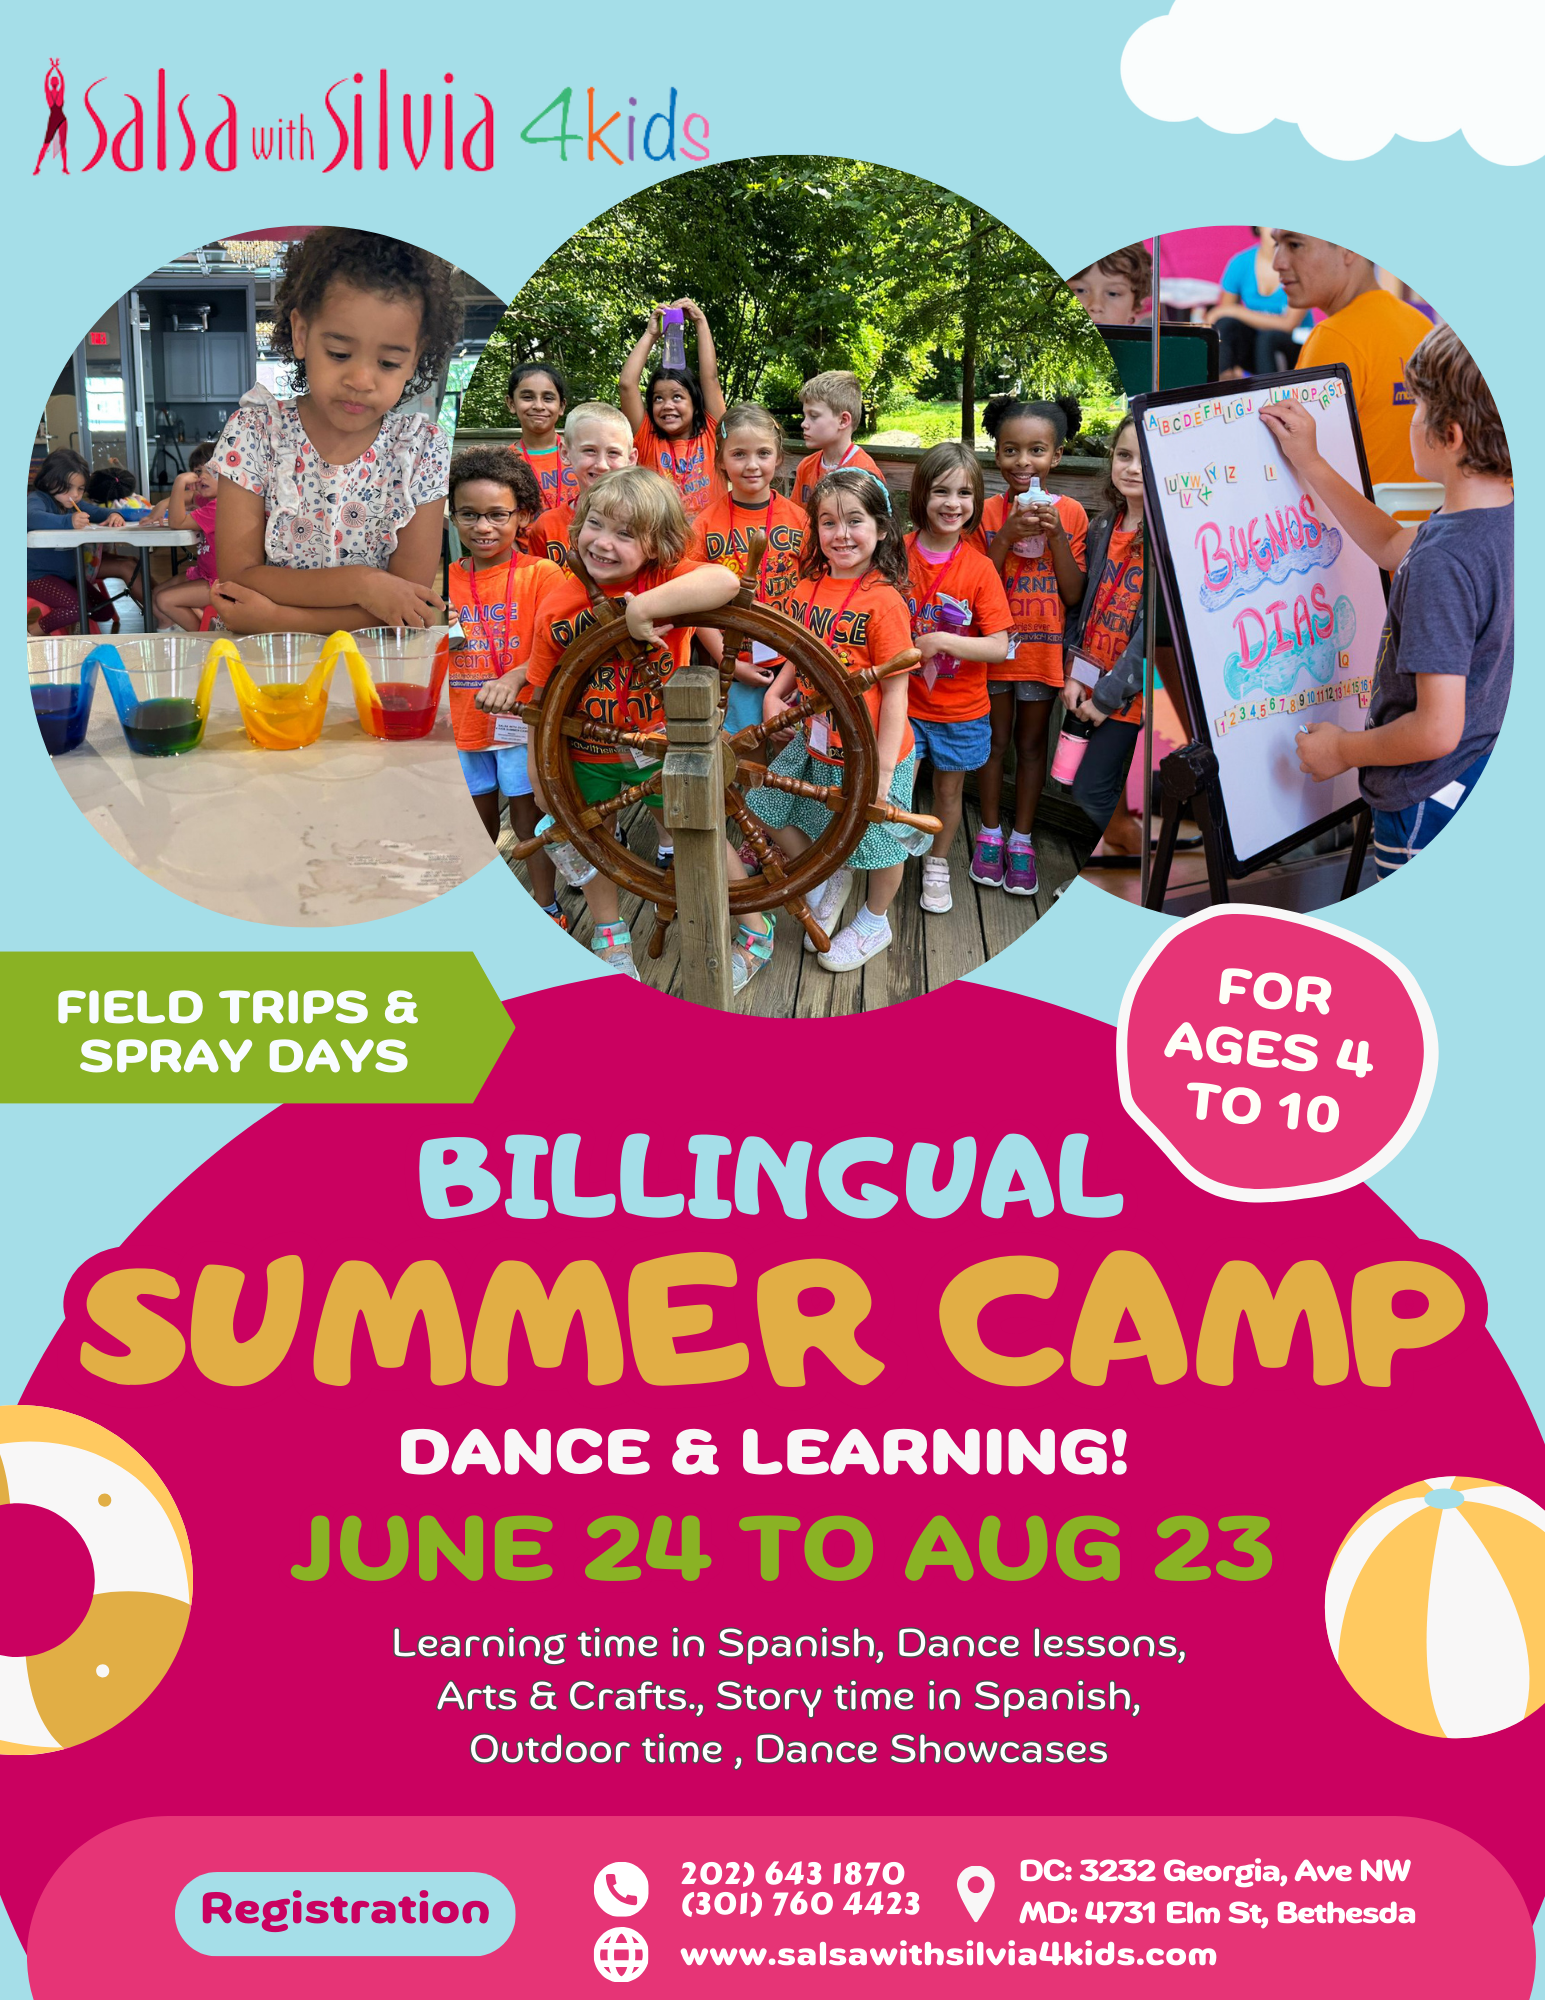 Billingual Summer Camp dance and learning in the DMV area